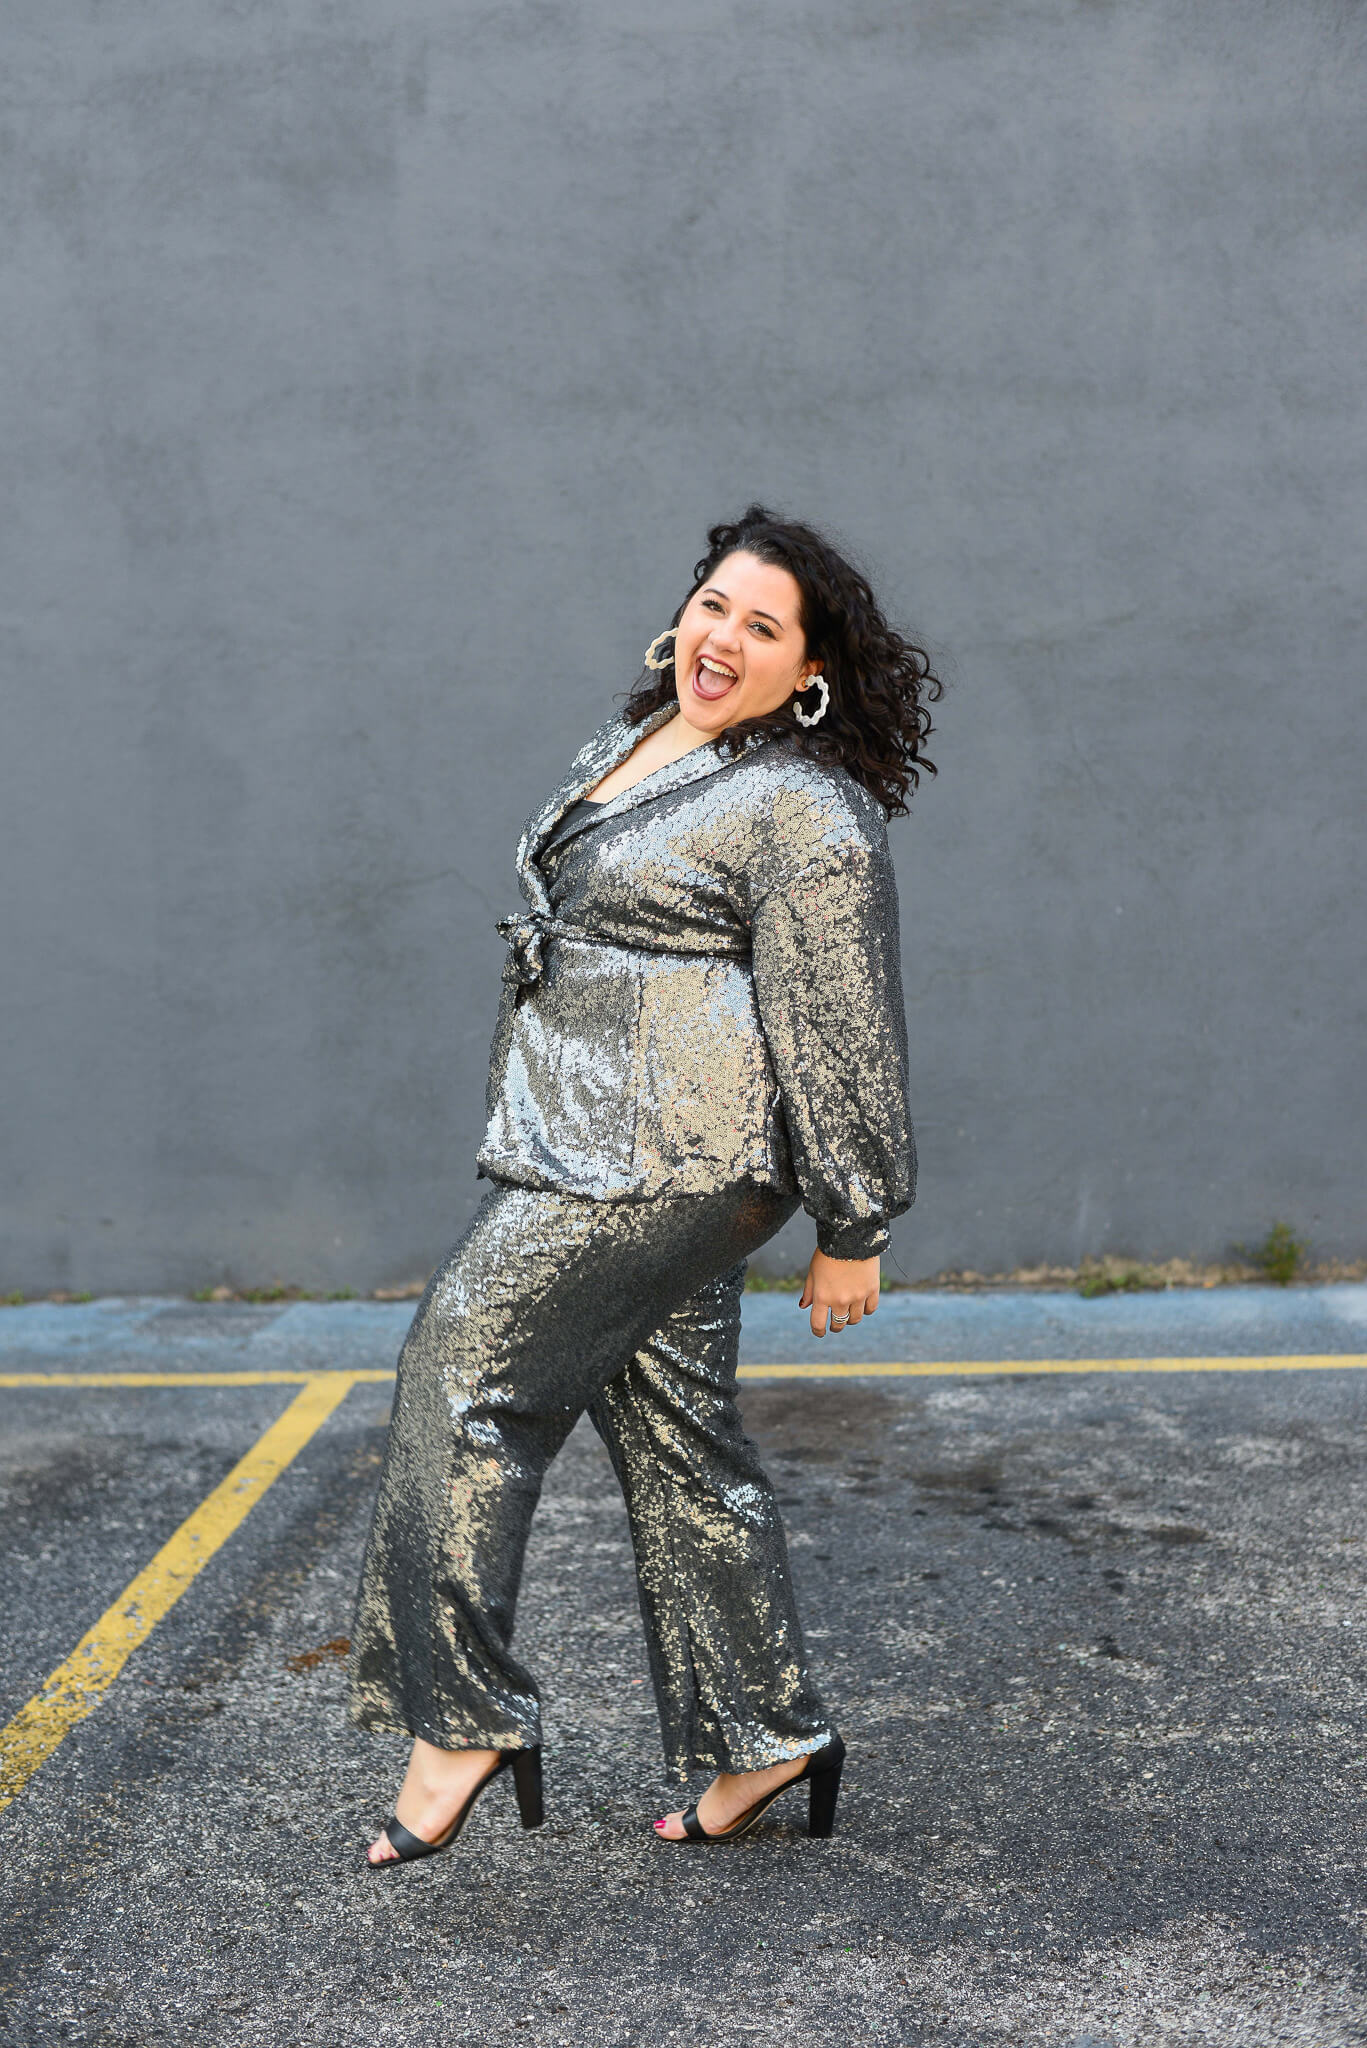 Kicking up my heels in a plus size sequin suit to ring in the new year